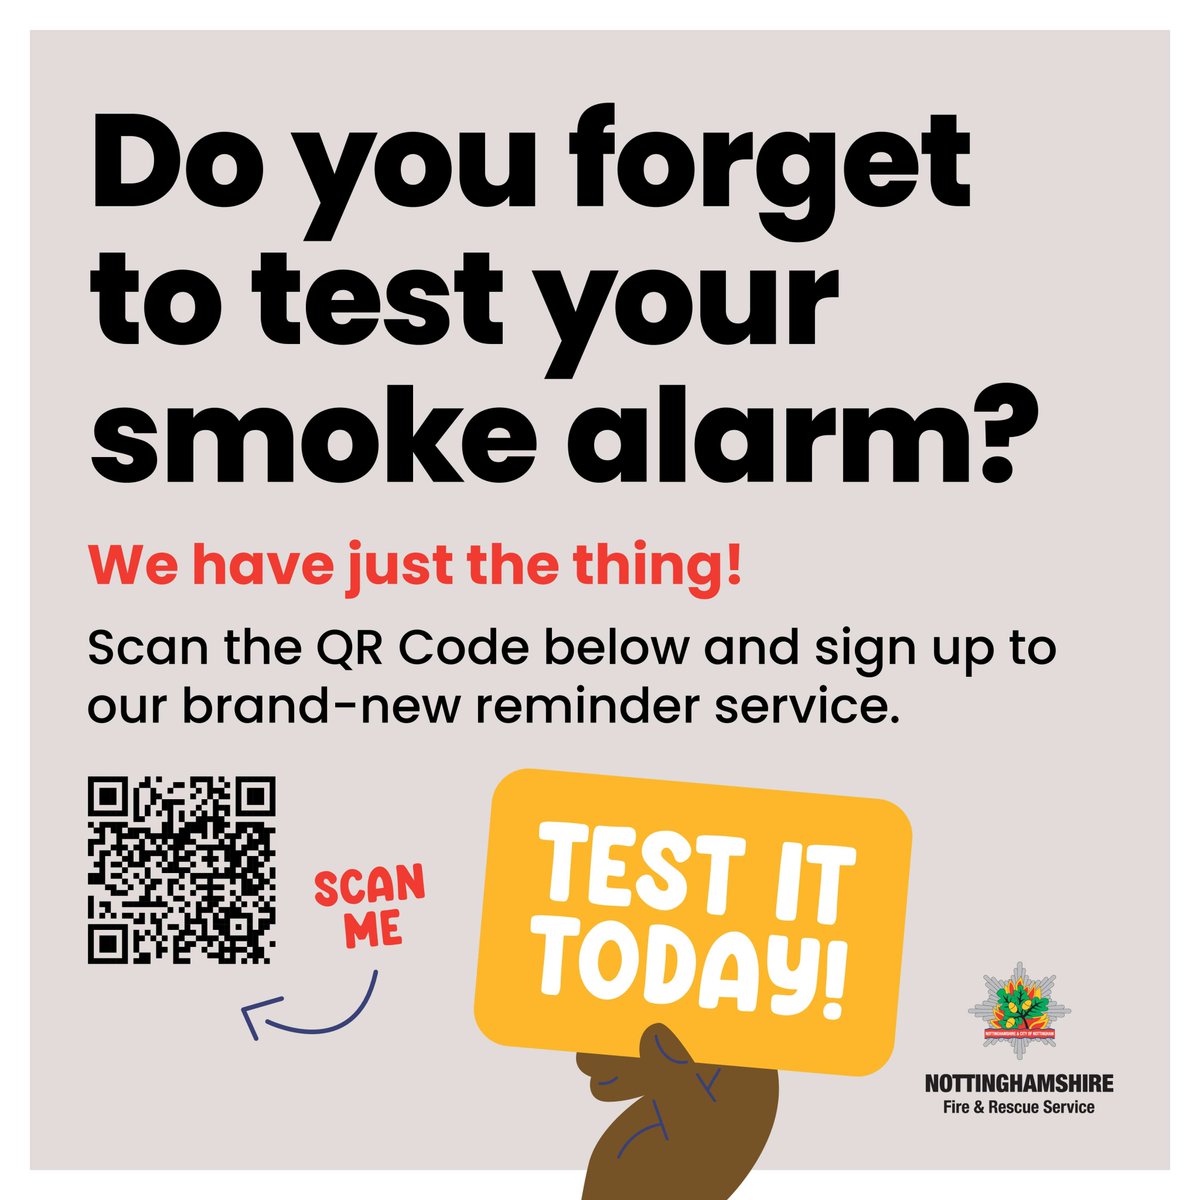 Do you need a weekly reminder to test your smoke alarms❓ We have launched a new service to help you with this. All you have to do is sign up with your email, and we'll do the rest! Scan the QR code below, or sign up via this link 👉 notts-fire.gov.uk/press-to-test #TestItTuesday